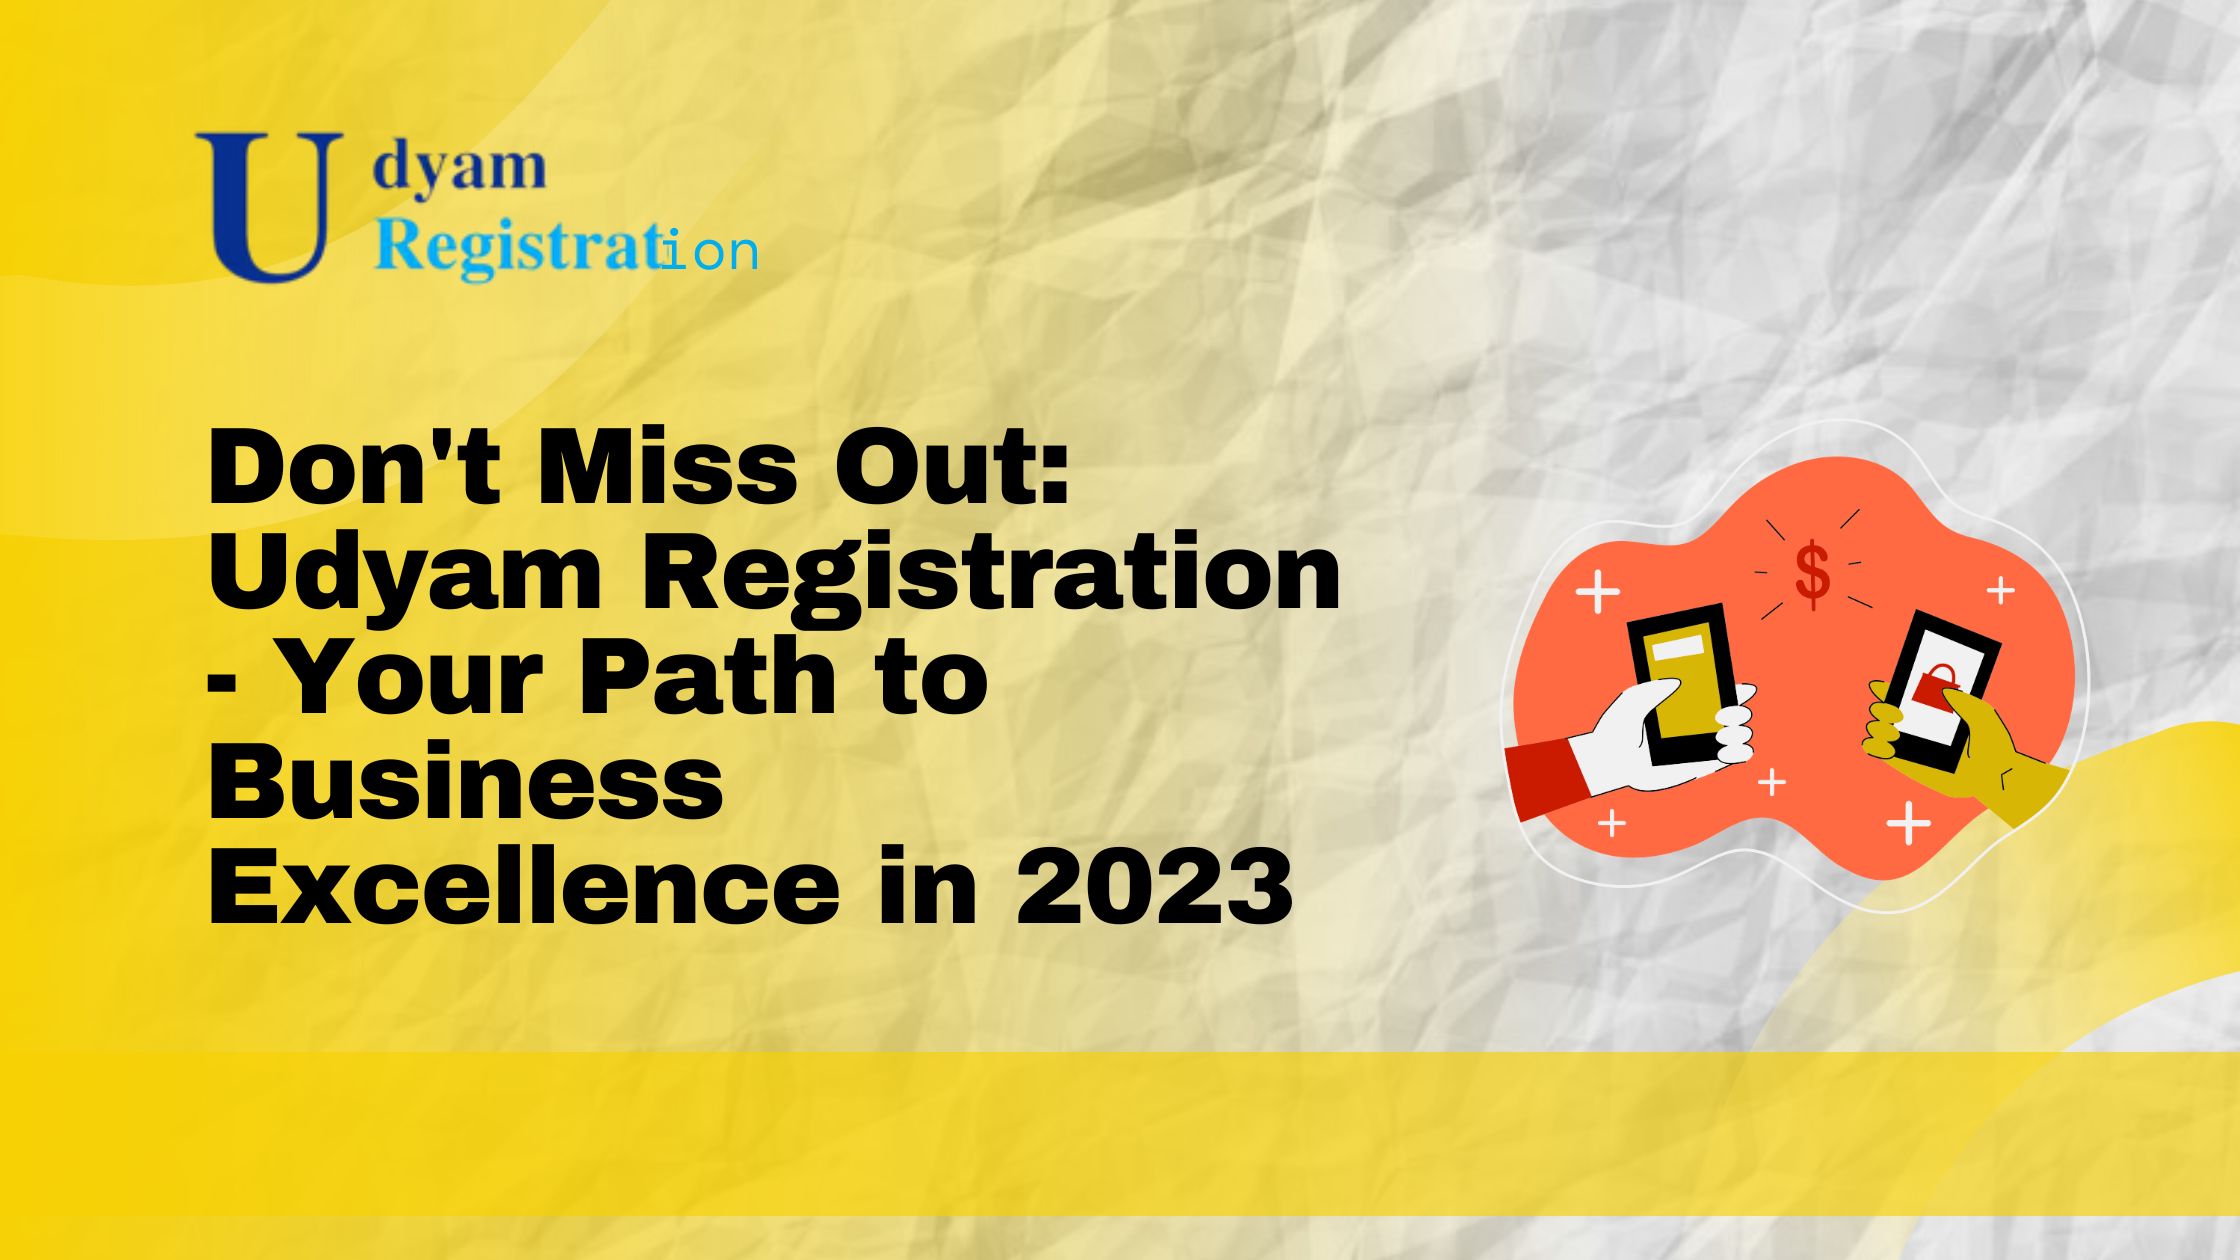 Udyam Registration – Your Path to Business Excellence in 2023